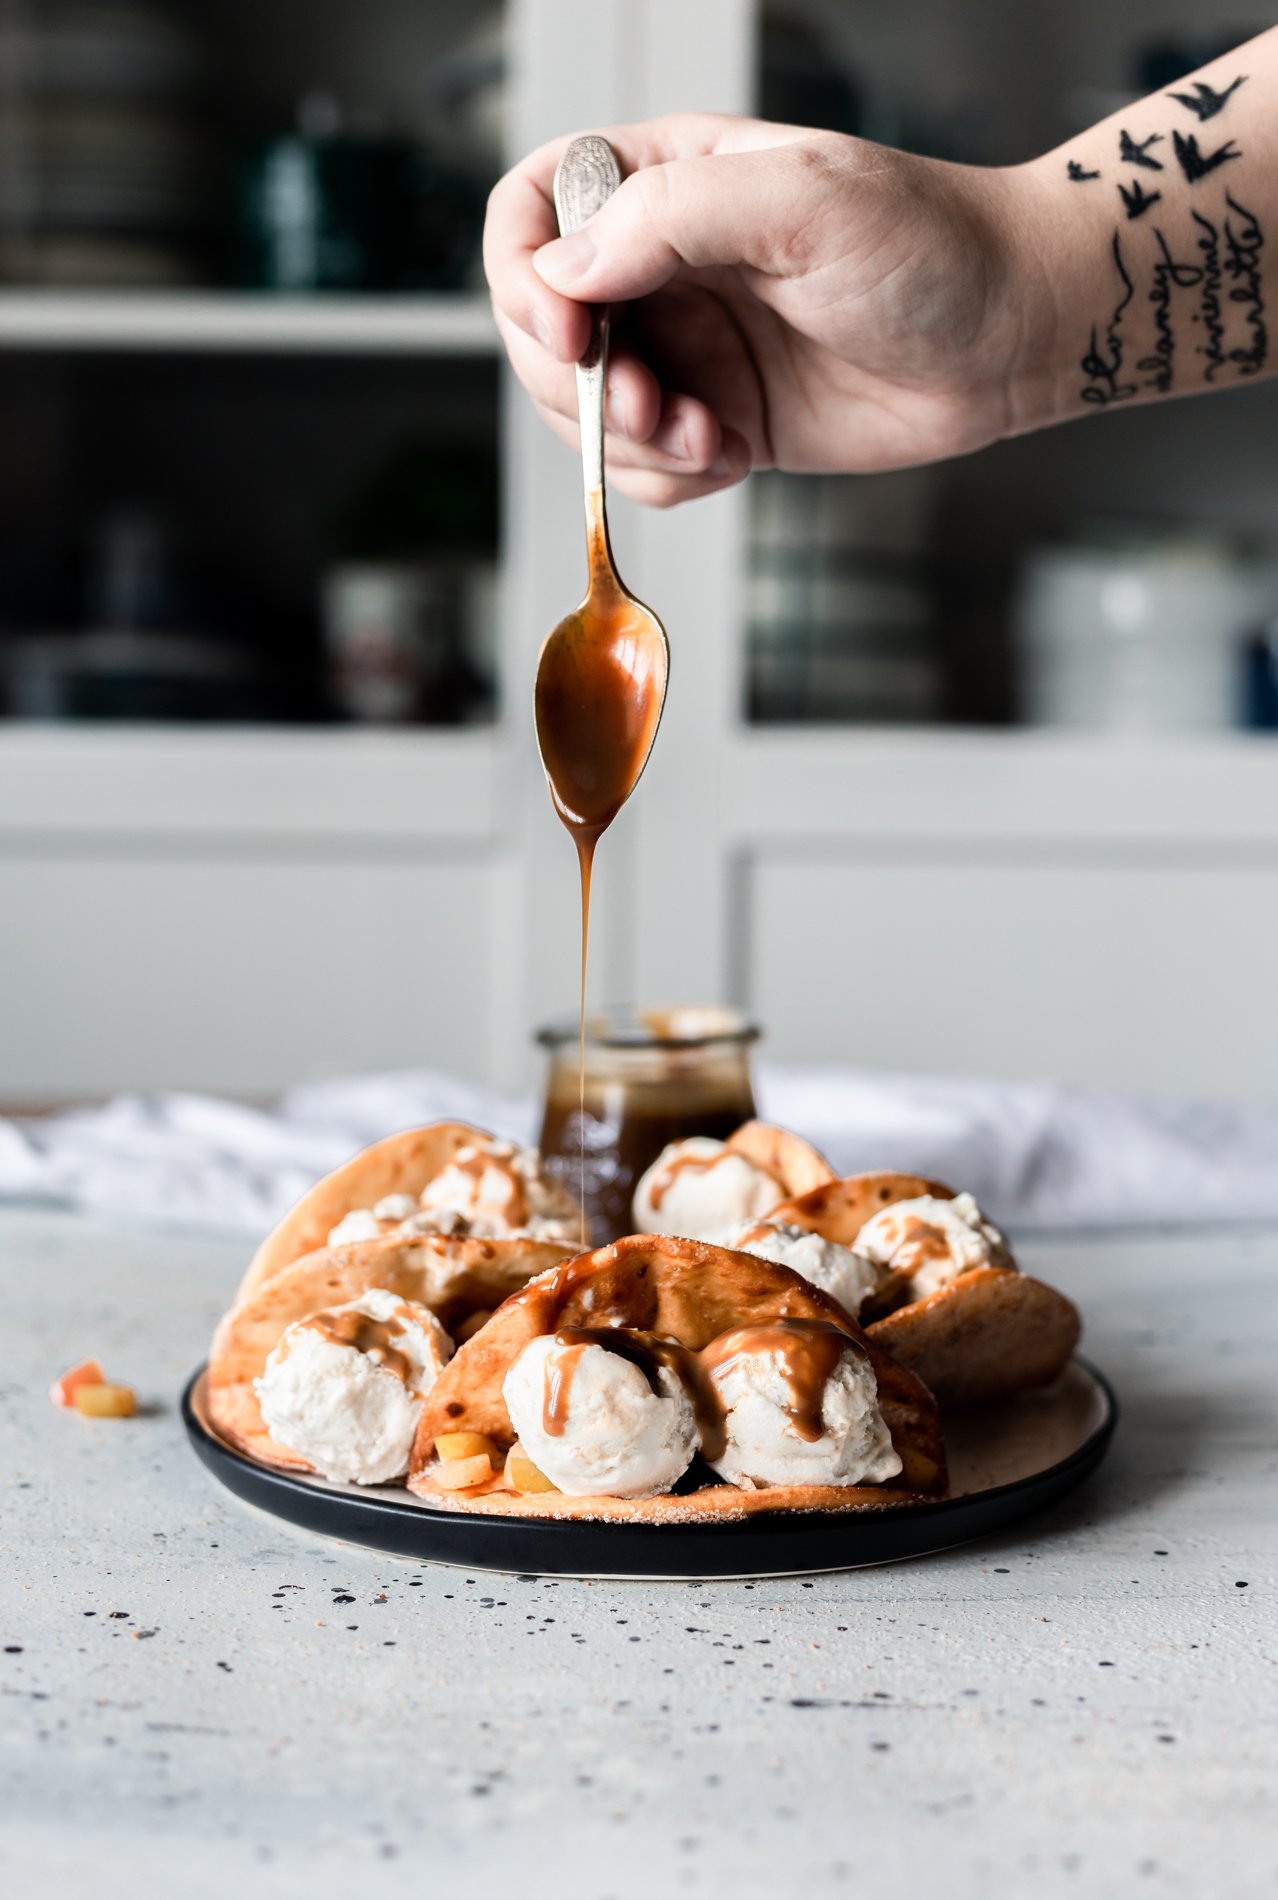 a hand drizzling vegan caramel sauce onto a plate of easy apple crumble dessert tacos